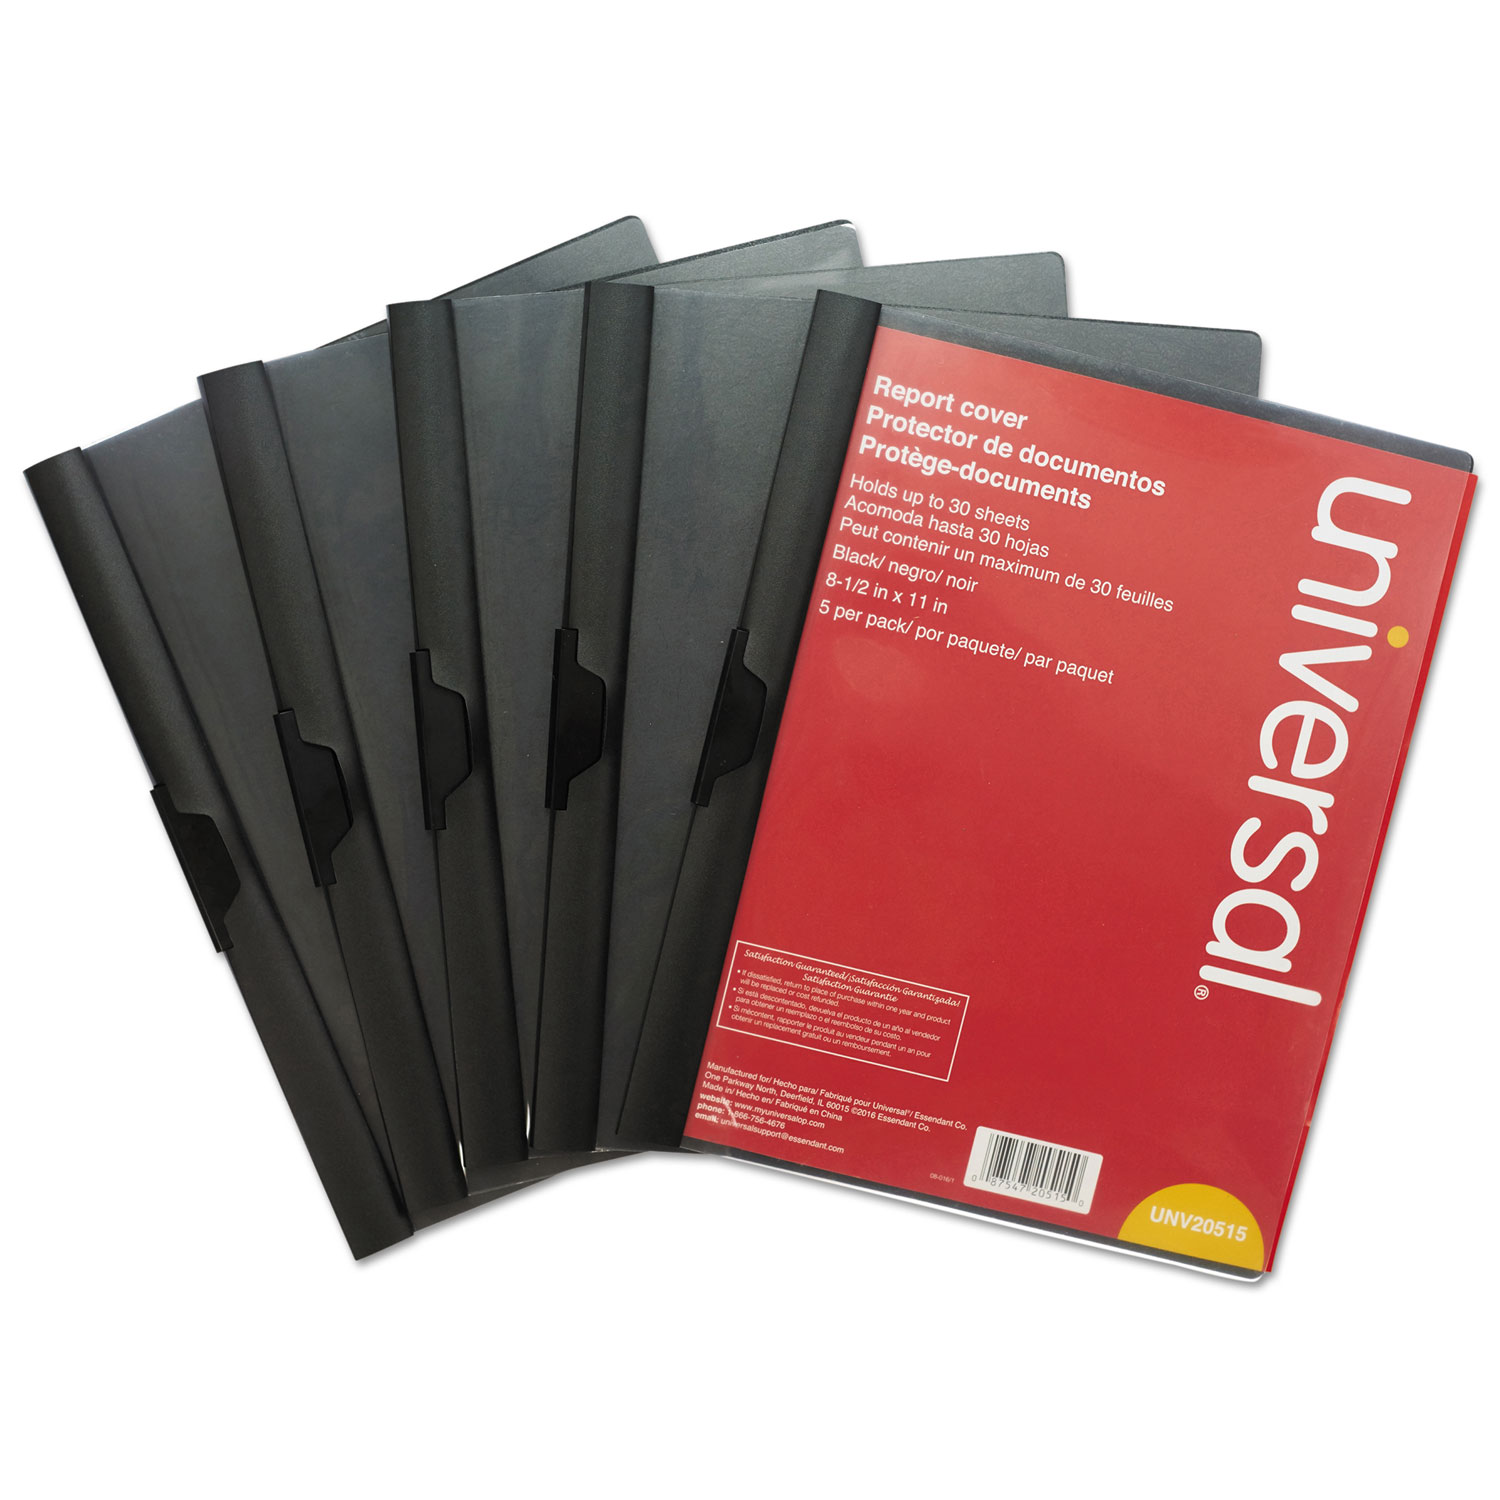  Universal UNV20515 Plastic Report Cover w/Clip, Letter, Holds 30 Pages, Clear/Black, 5/PK (UNV20515) 